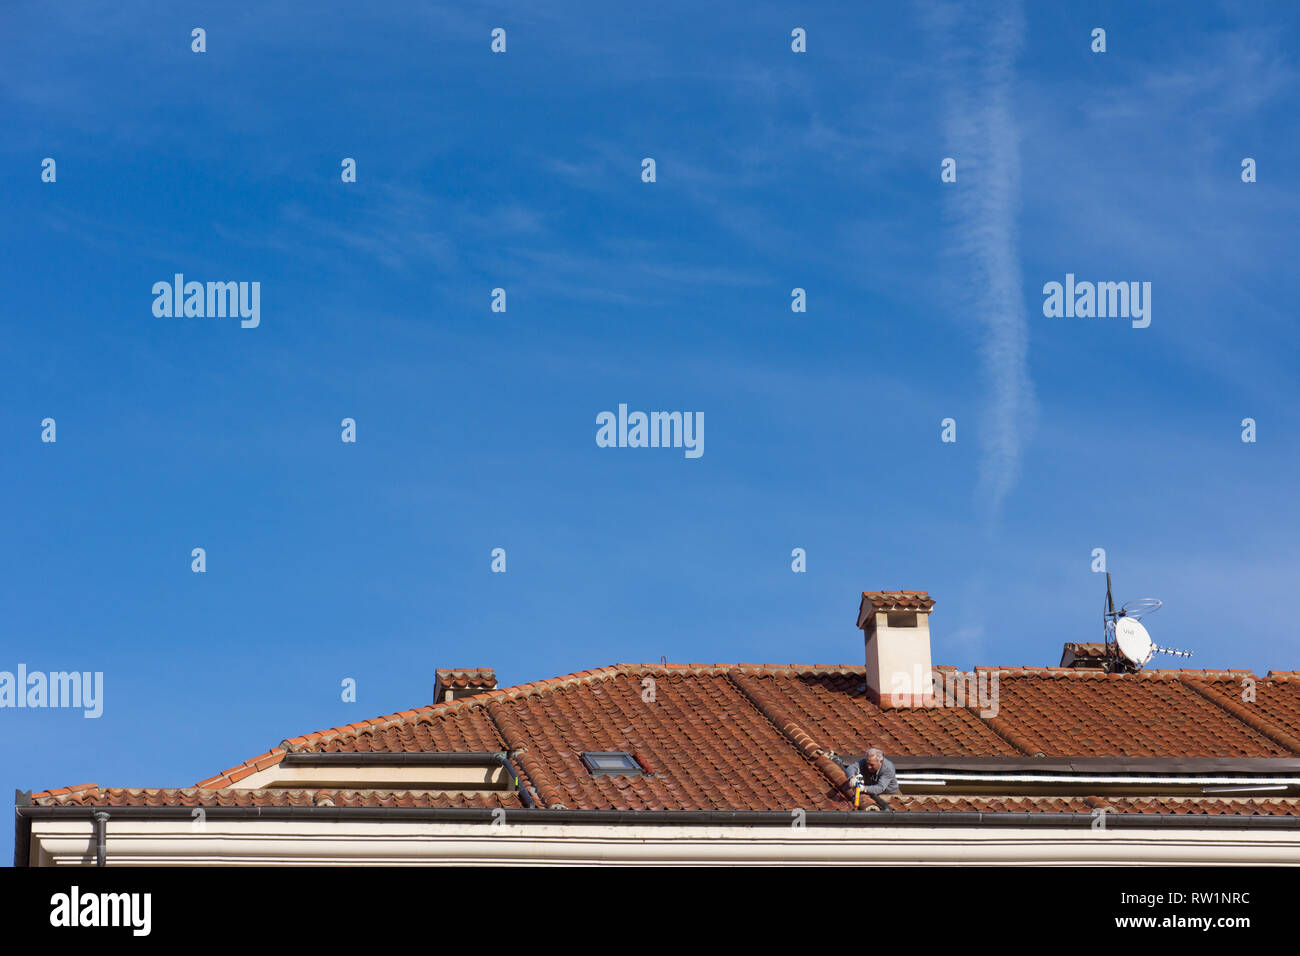 Man leaning from a roof terrace masticing, silicon sealant, fixing, sealing, terracota roof tiles in Spain. Stock Photo